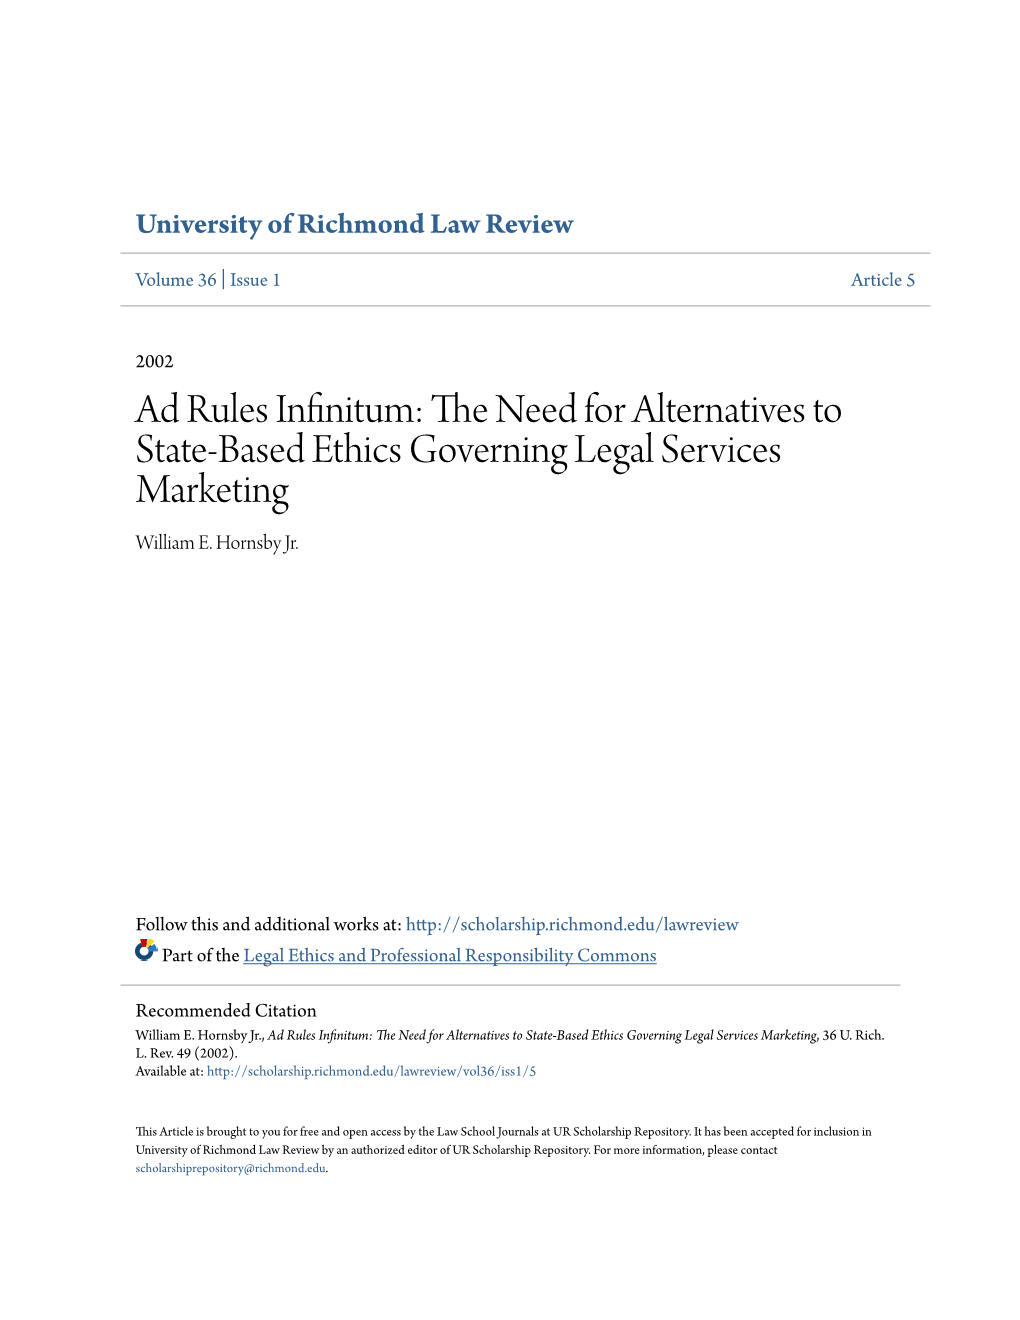 Ad Rules Infinitum: the Need for Alternatives to State-Based Ethics Governing Legal Services Marketing, 36 U